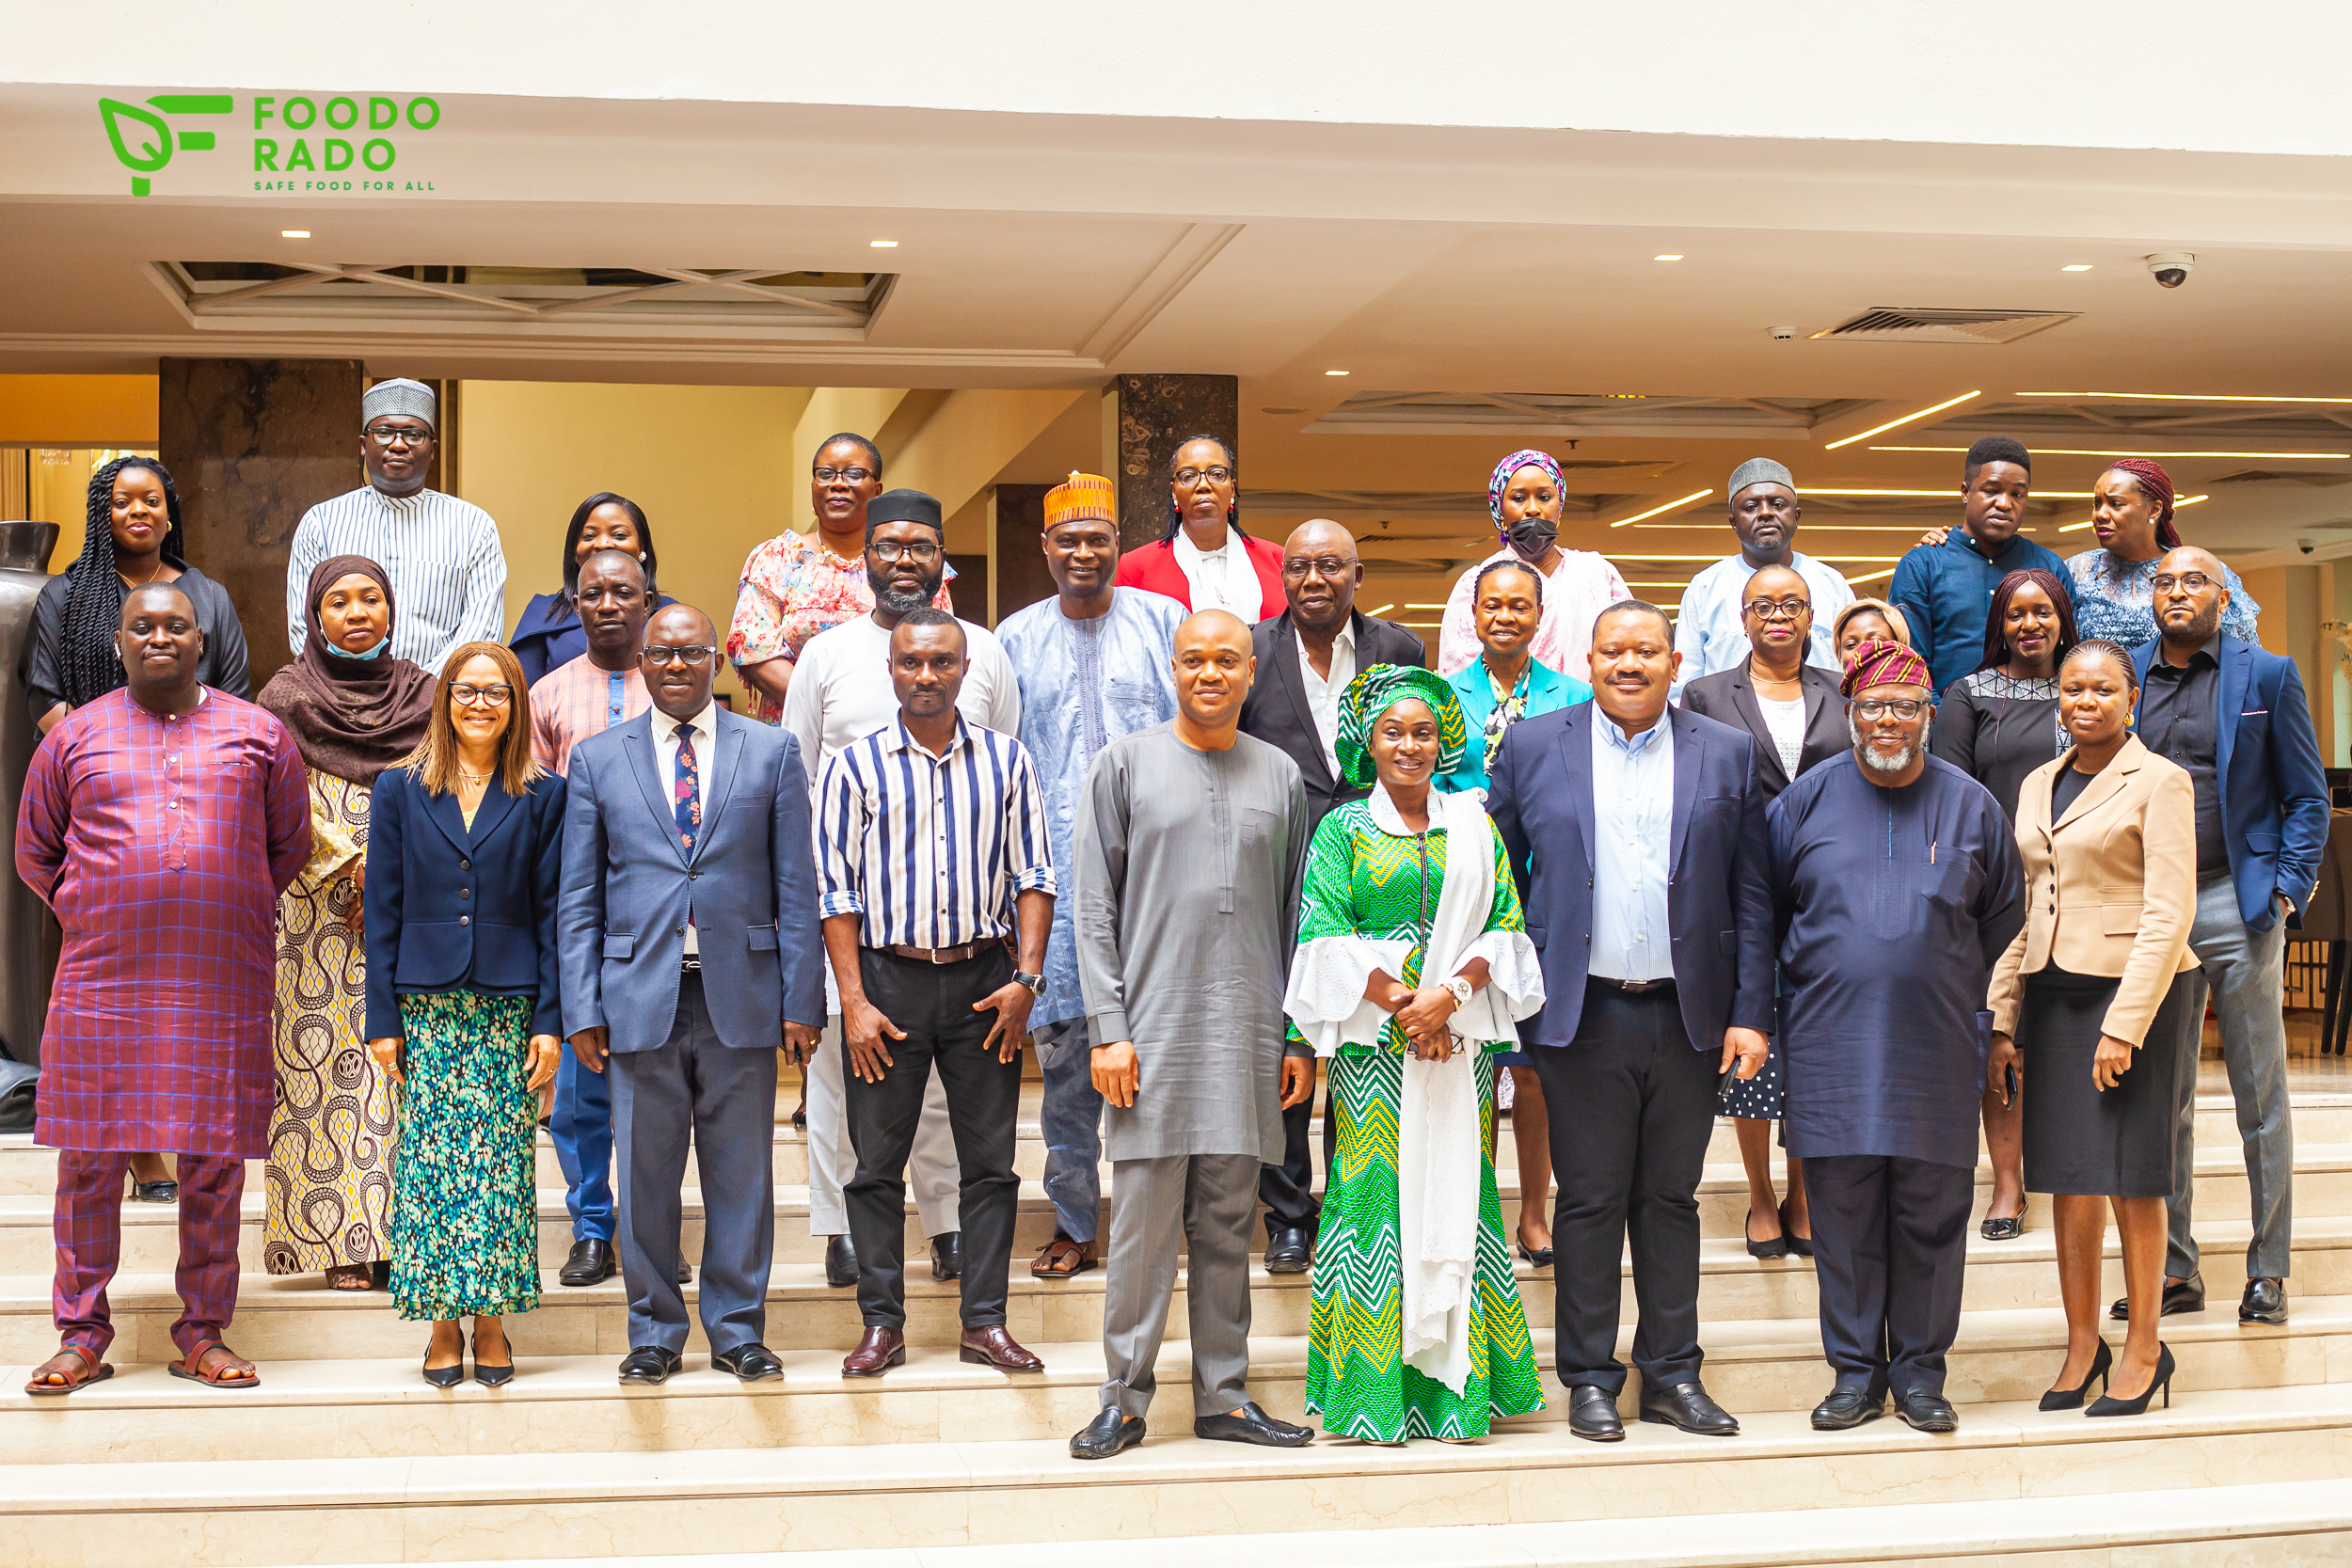 NESG holds Expert Forum on Food Safety, The Nigerian Economic Summit Group, The NESG, think-tank, think, tank, nigeria, policy, nesg, africa, number one think in africa, best think in nigeria, the best think tank in africa, top 10 think tanks in nigeria, think tank nigeria, economy, business, PPD, public, private, dialogue, Nigeria, Nigeria PPD, NIGERIA, PPD